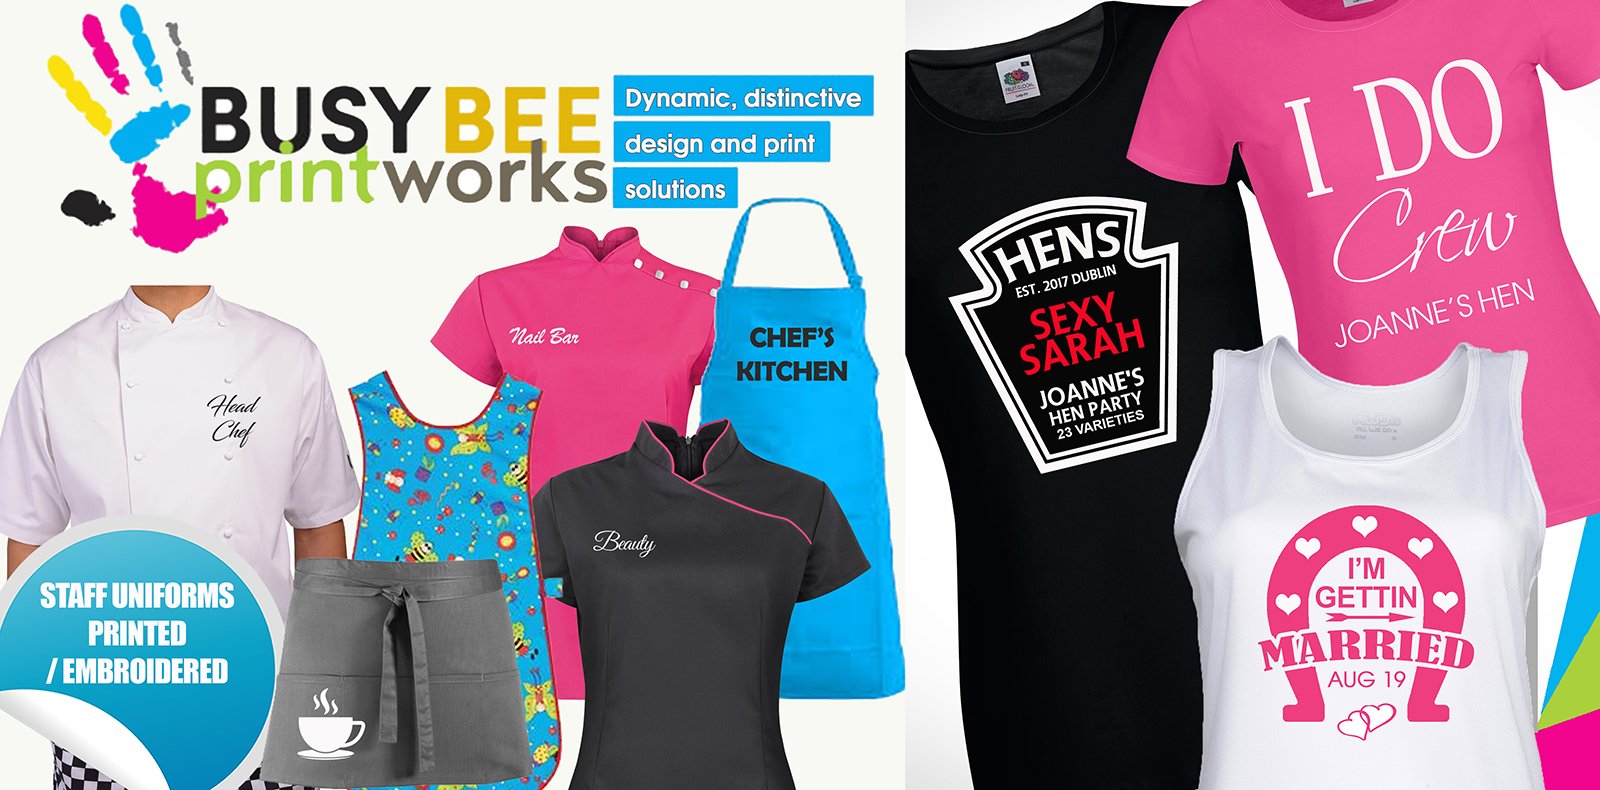 Staff uniforms printed / embroidered